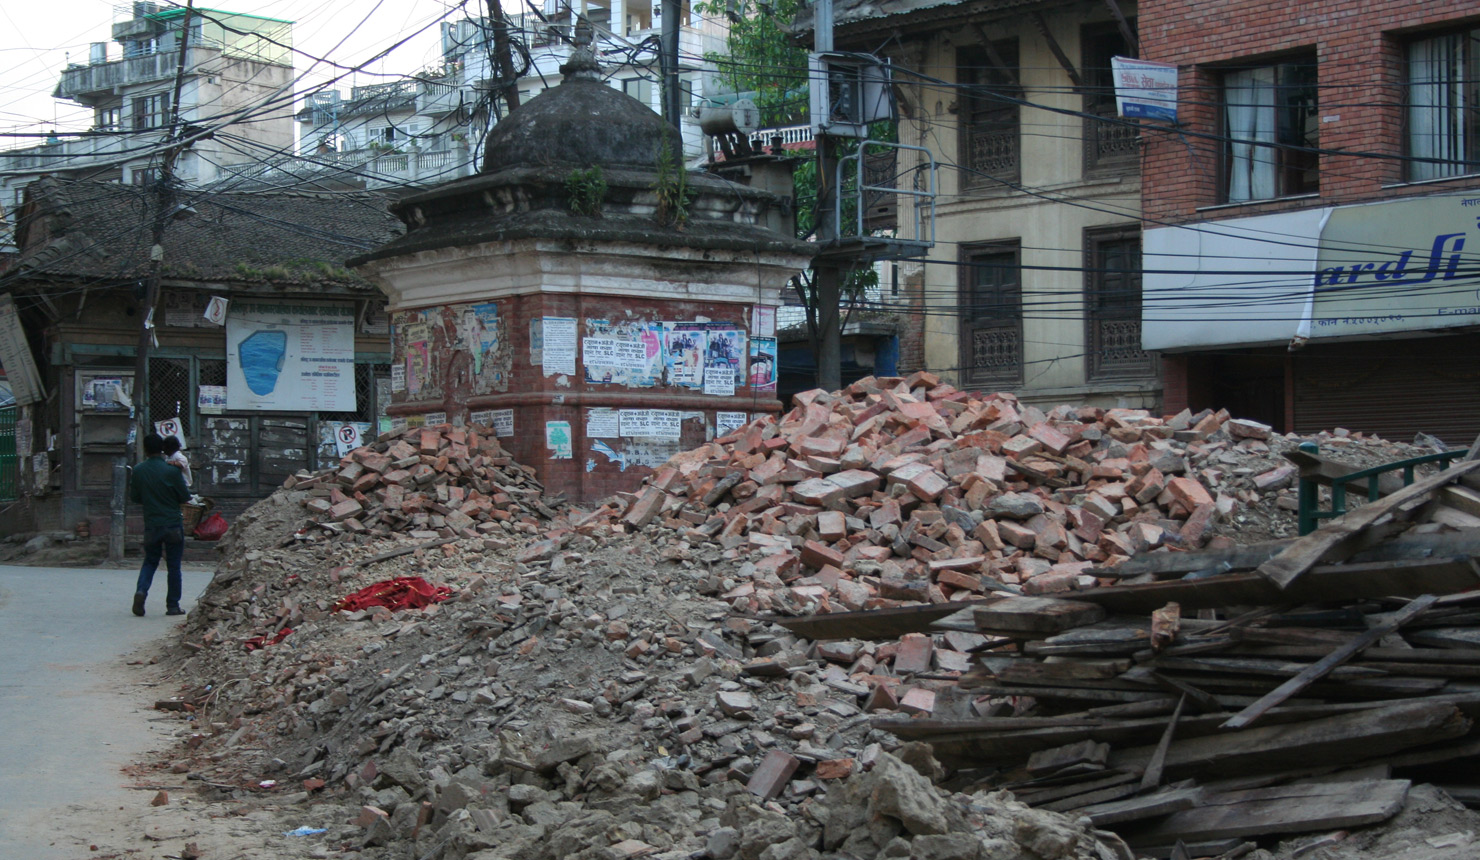 Many of the buildings in Kathmandu that survived the first quake collapsed when a 7.3 magnitude earthquake struck on May 12. Permanent shelter is an urgent need in the devastated country as the monsoon season approaches, says Geisel student Shreya Shrestha. (Photo by Shreya Shrestha)